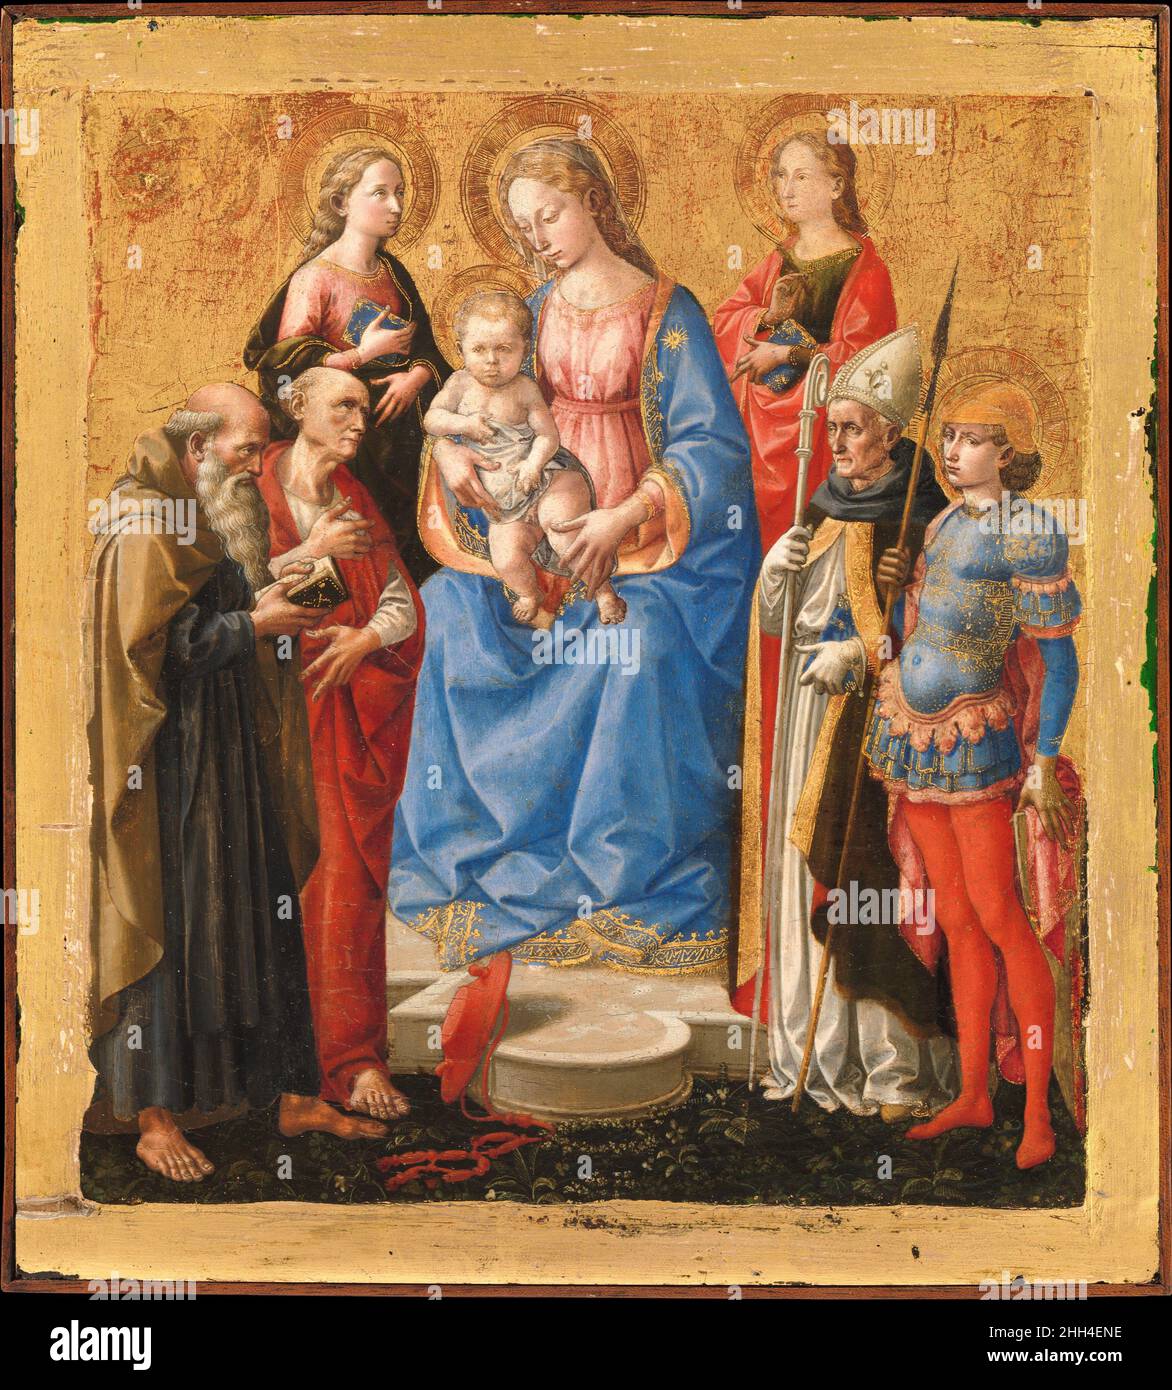 Madonna and Child with Six Saints late 1440s Pesellino (Francesco di Stefano) Italian Pesellino specialized in delicately executed small-scale paintings ideal for private study or to carry for private devotion. Remarkably, despite their small size, the figures are described with a mastery that opens a new chapter in Florentine painting. Left to right the saints are: Anthony Abbot, Jerome, Cecilia, Catherine of Alexandria, Augustine, and George. The figure types and lighting reveal the influence of Fra Filippo Lippi, with whom Pesellino occasionally collaborated.. Madonna and Child with Six Sai Stock Photo